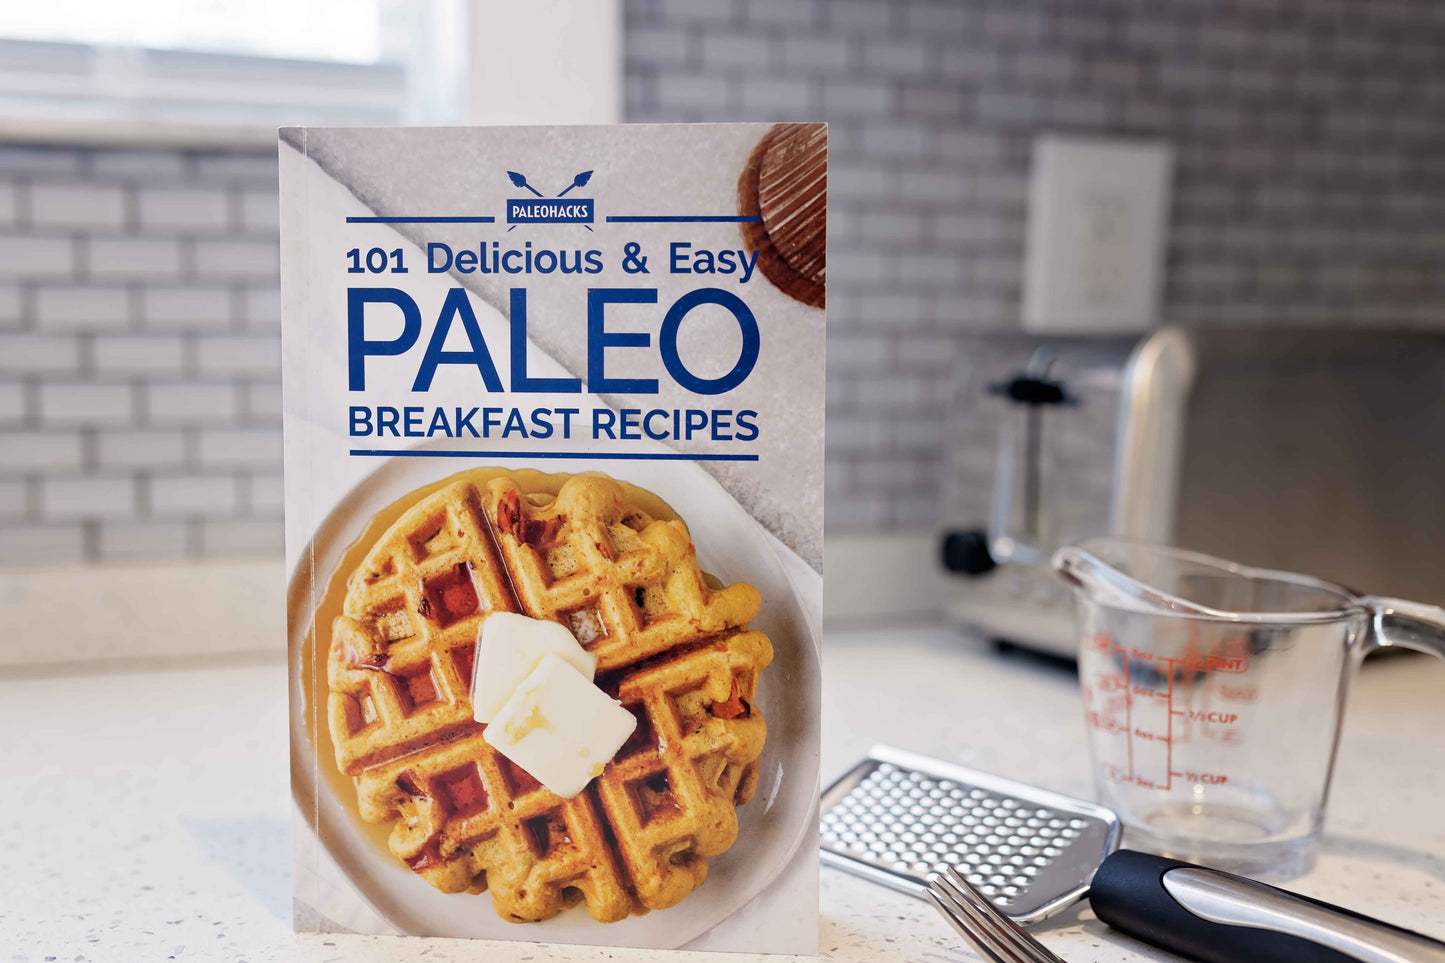 The Paleo Breakfast Recipes Cookbook stands on a kitchen counter next to a measuring cup and a grater.